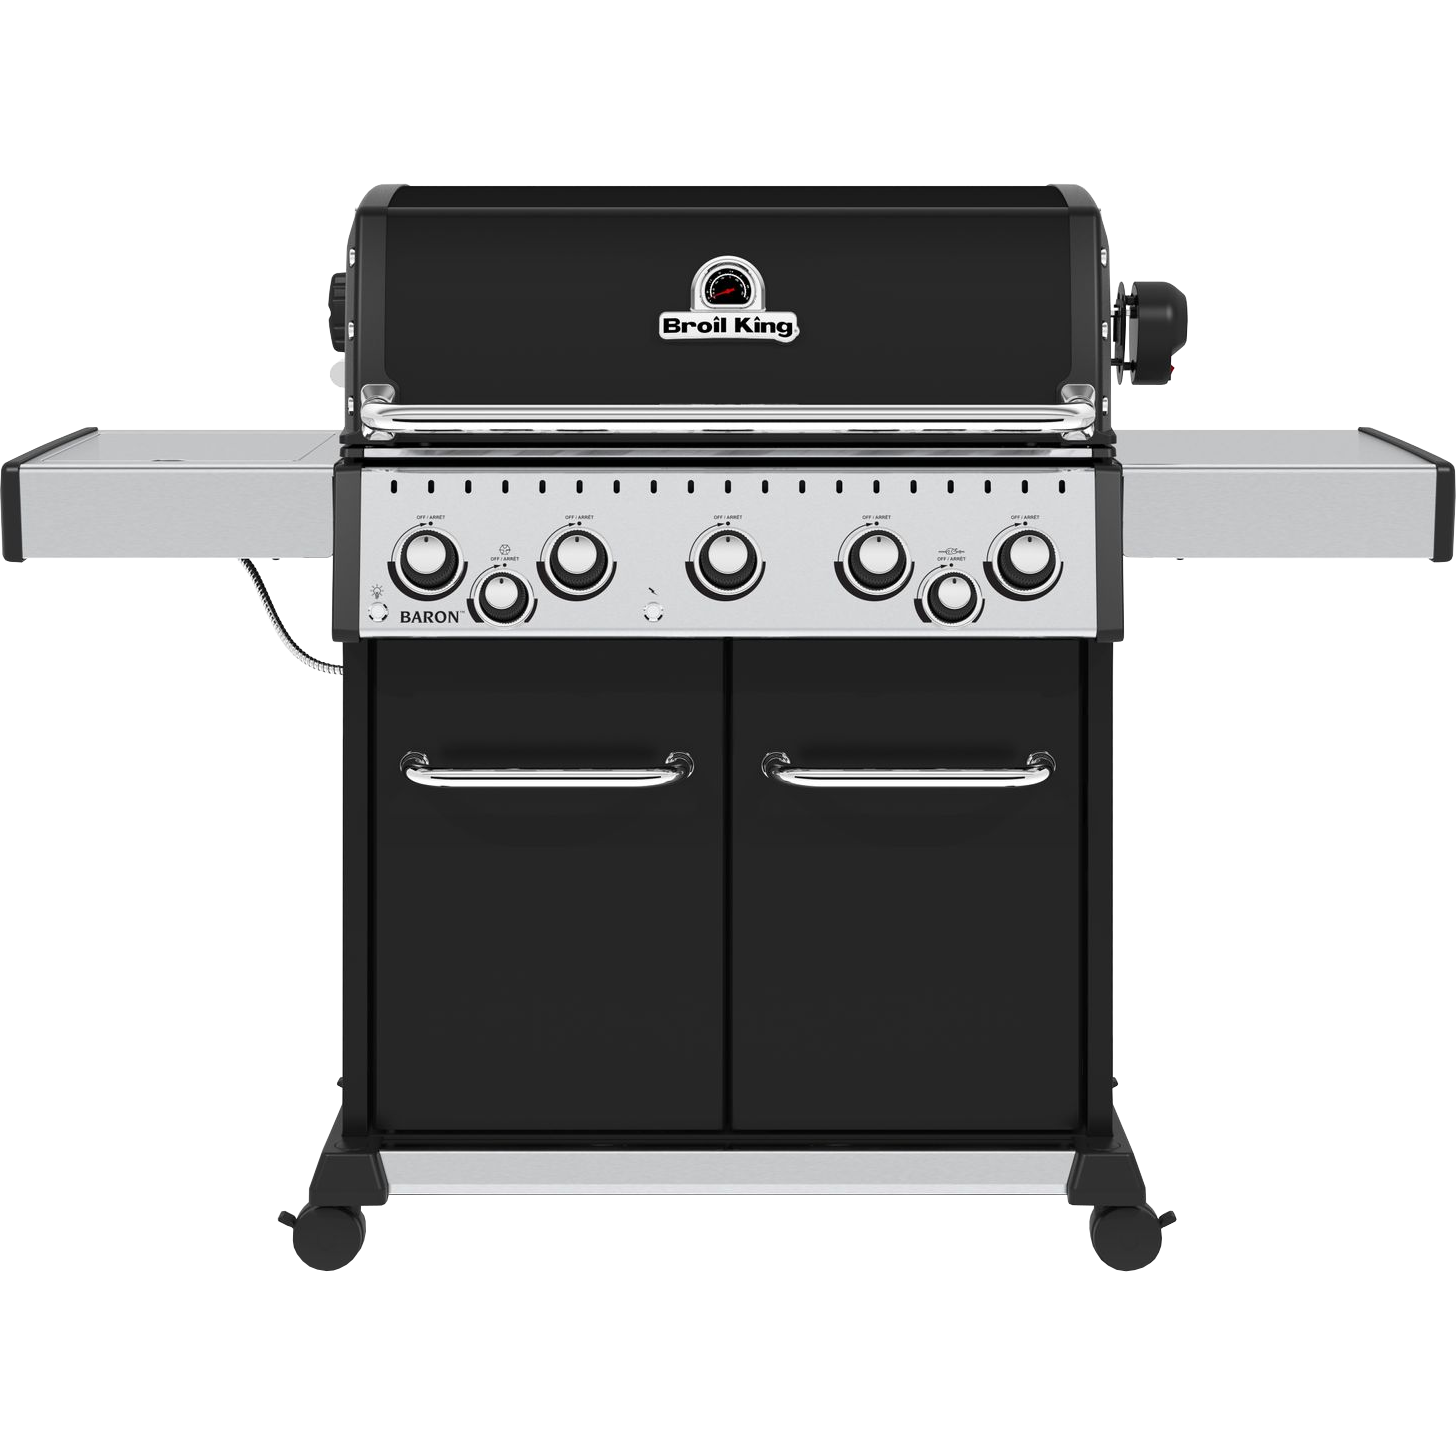 Broil King Baron 590 Schwarz Gasgrill in Frontansicht